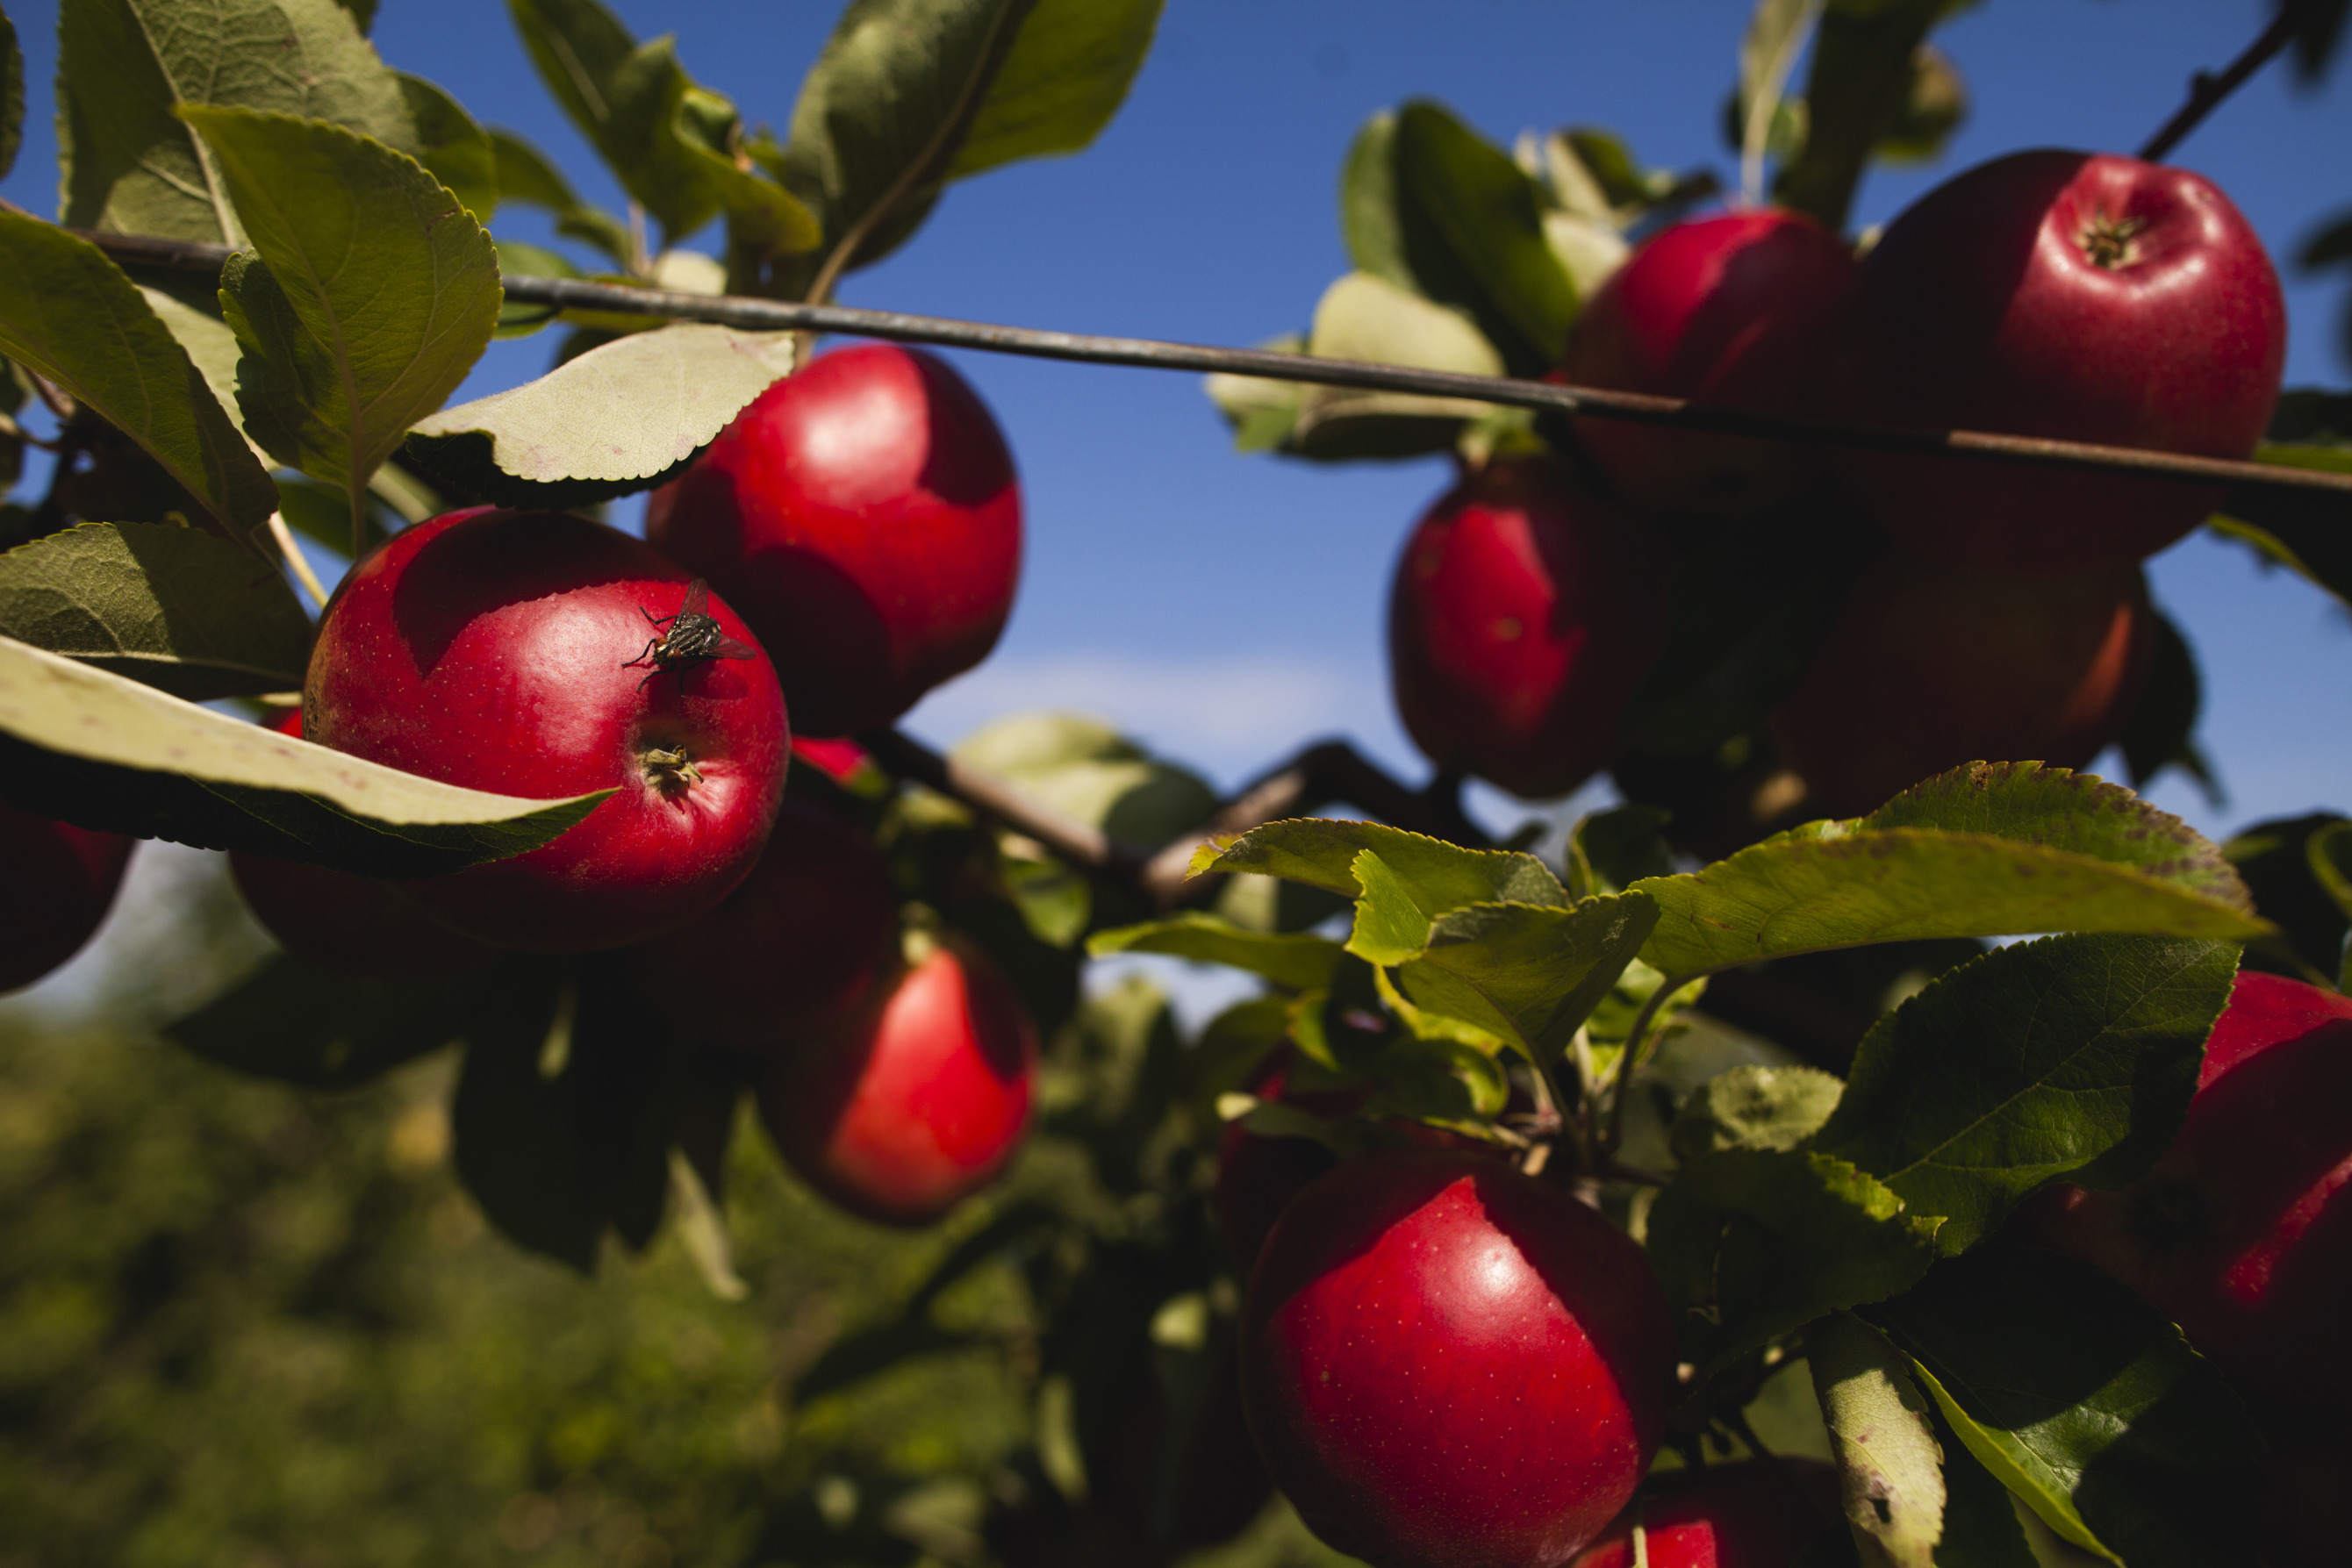 Importing Apple Trees Instead of Apples, Russia Secures Food